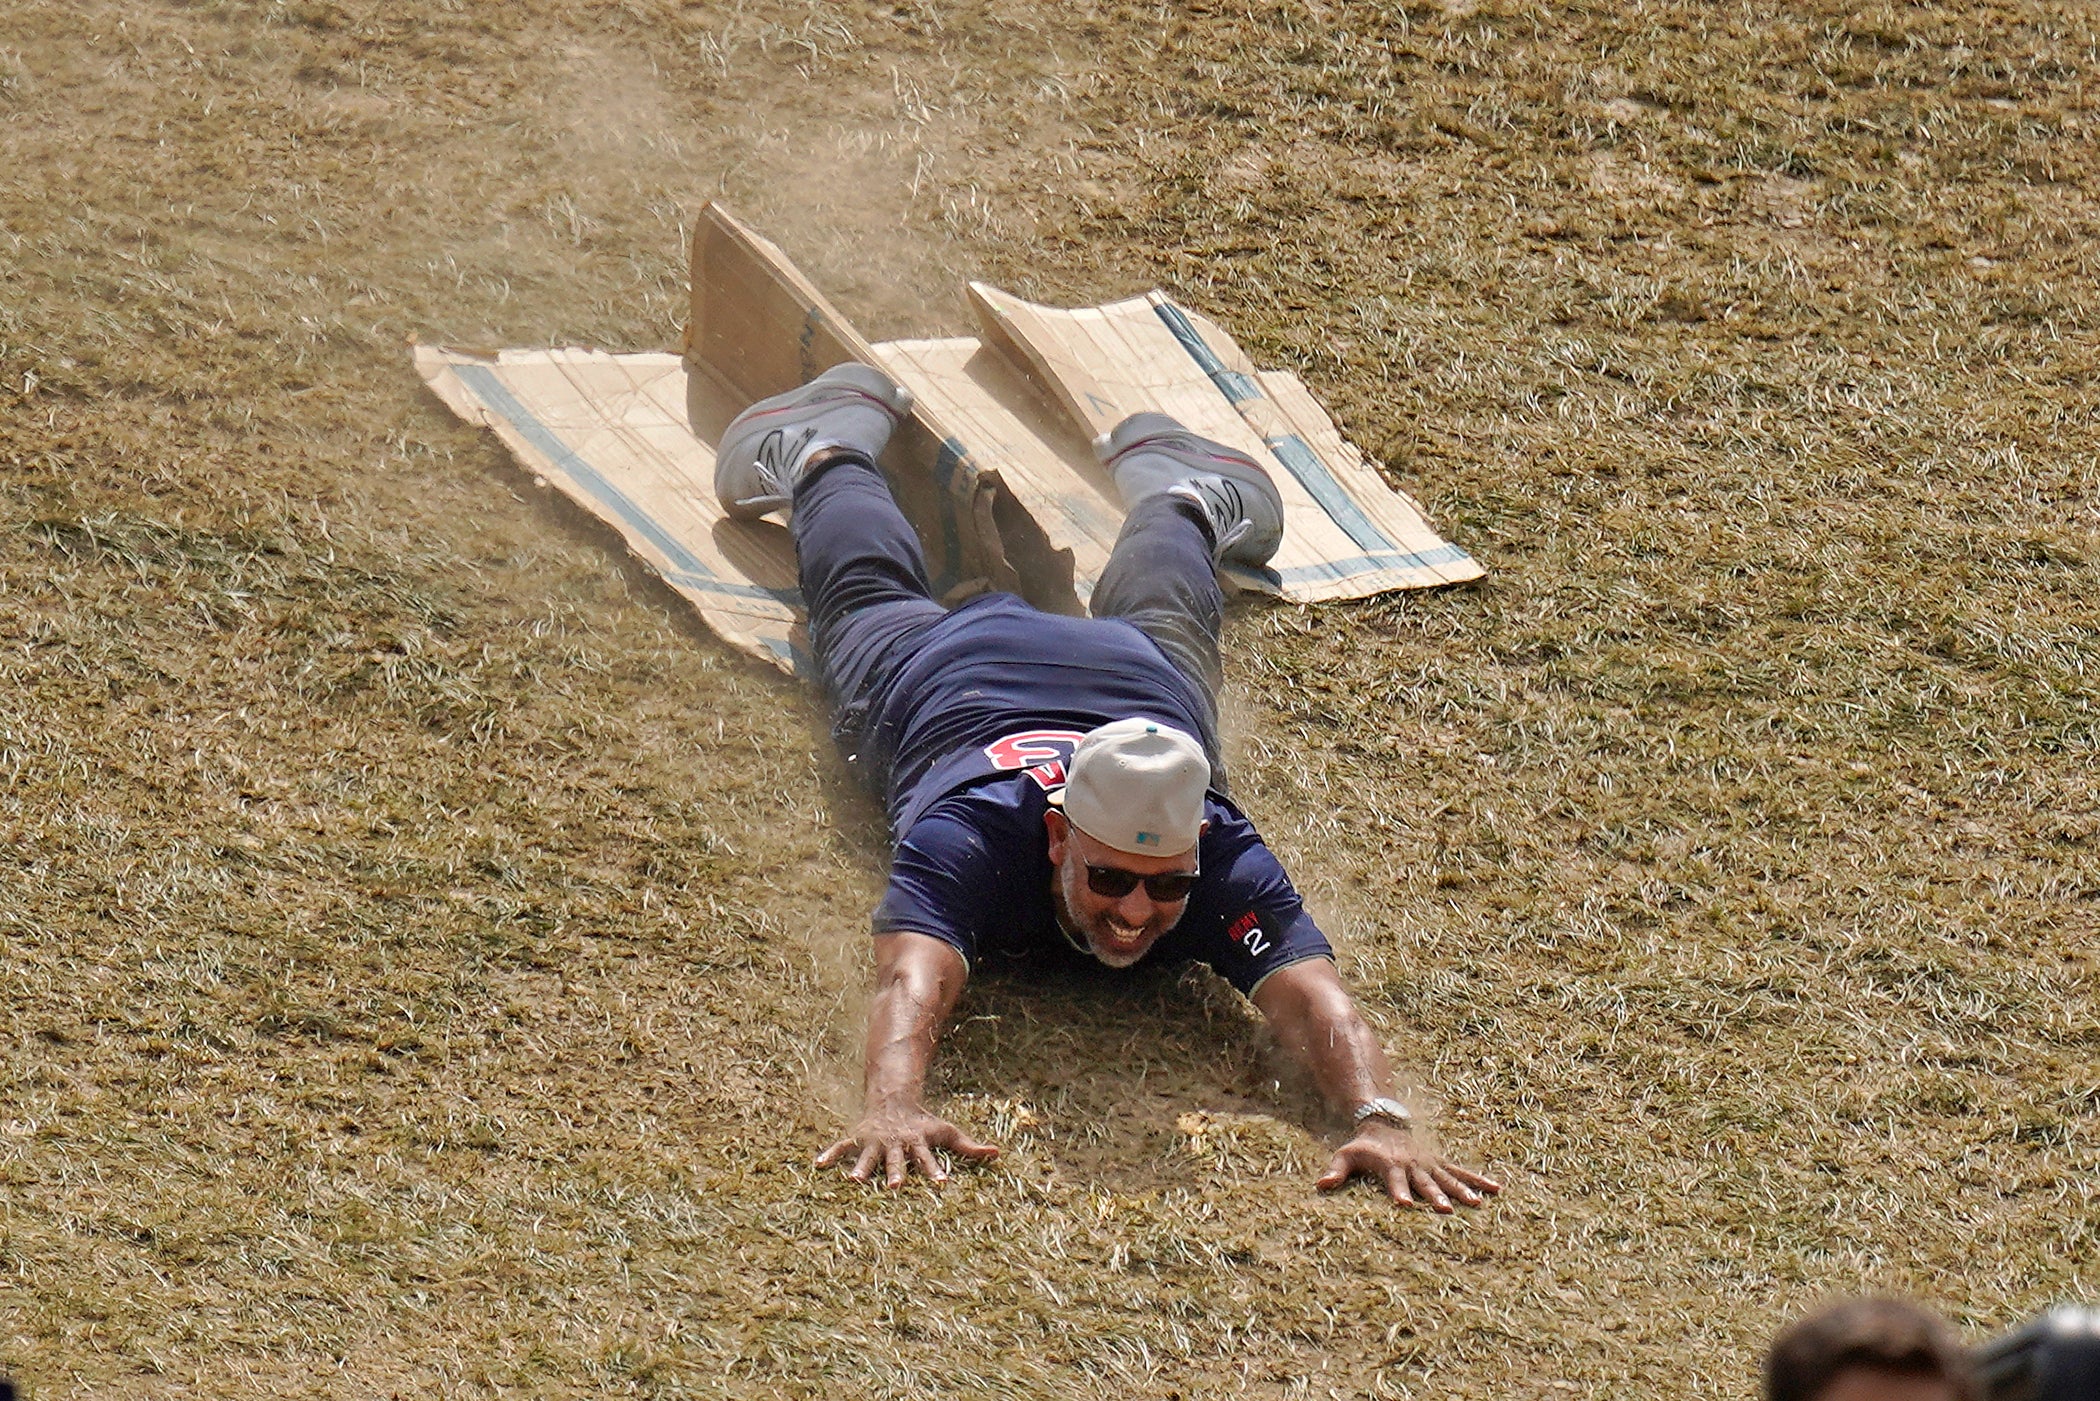 Alex Cora smiles as he slides head-first down a hill on a piece of cardboard.